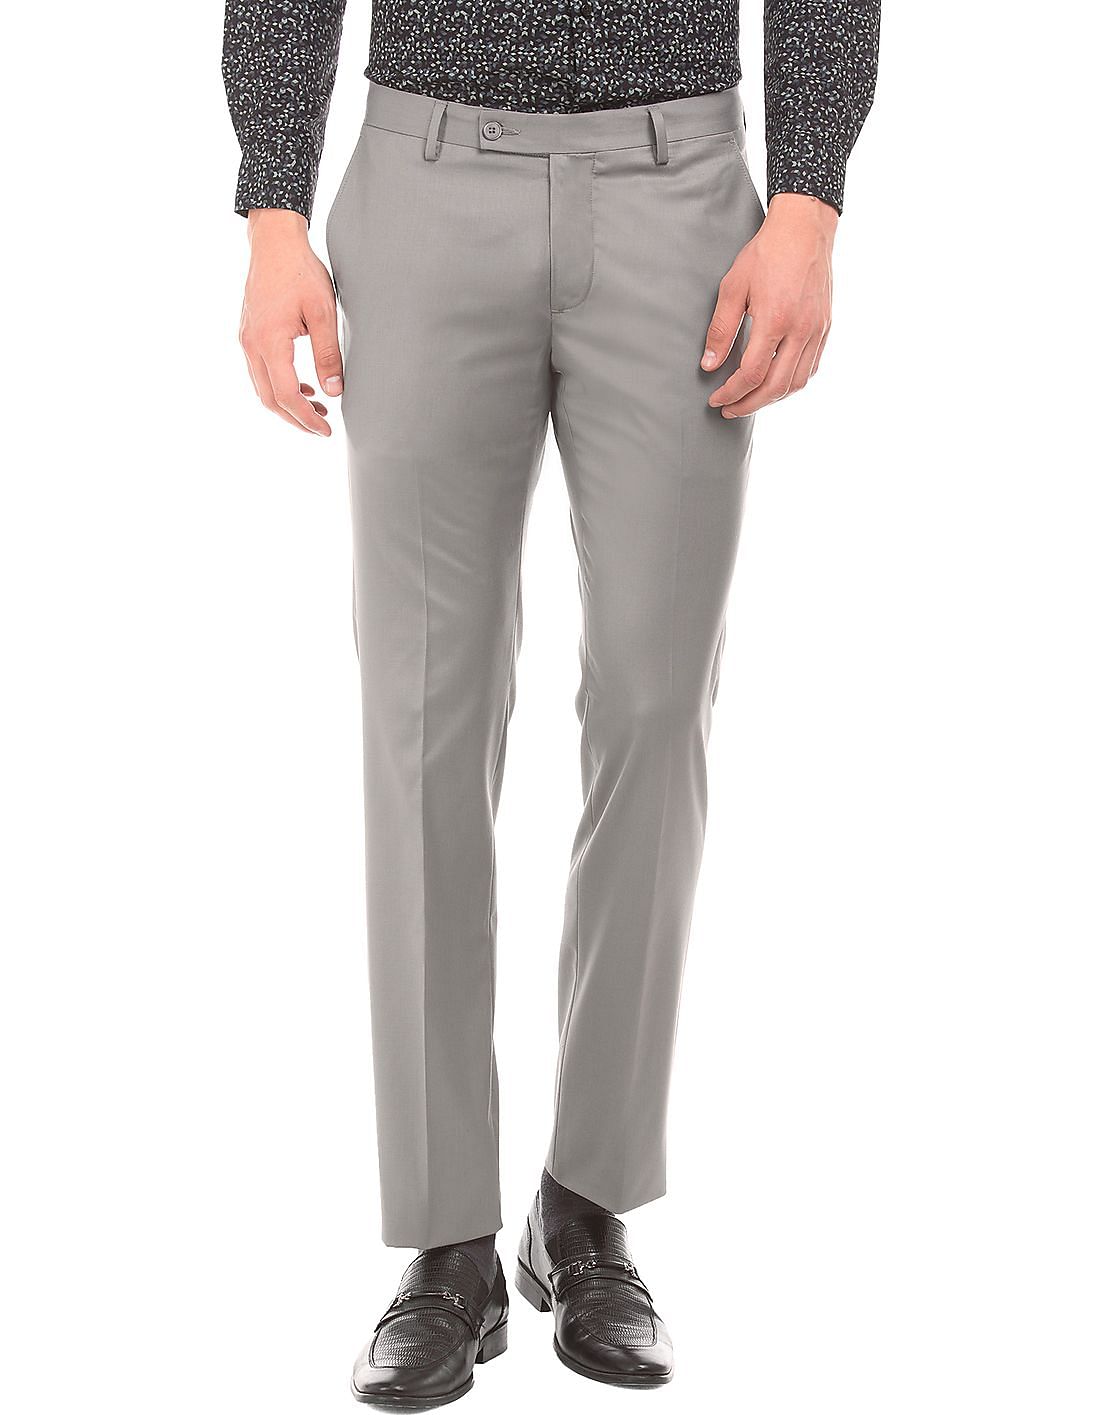 Buy Arrow Slim Fit Flat Front Trousers - NNNOW.com